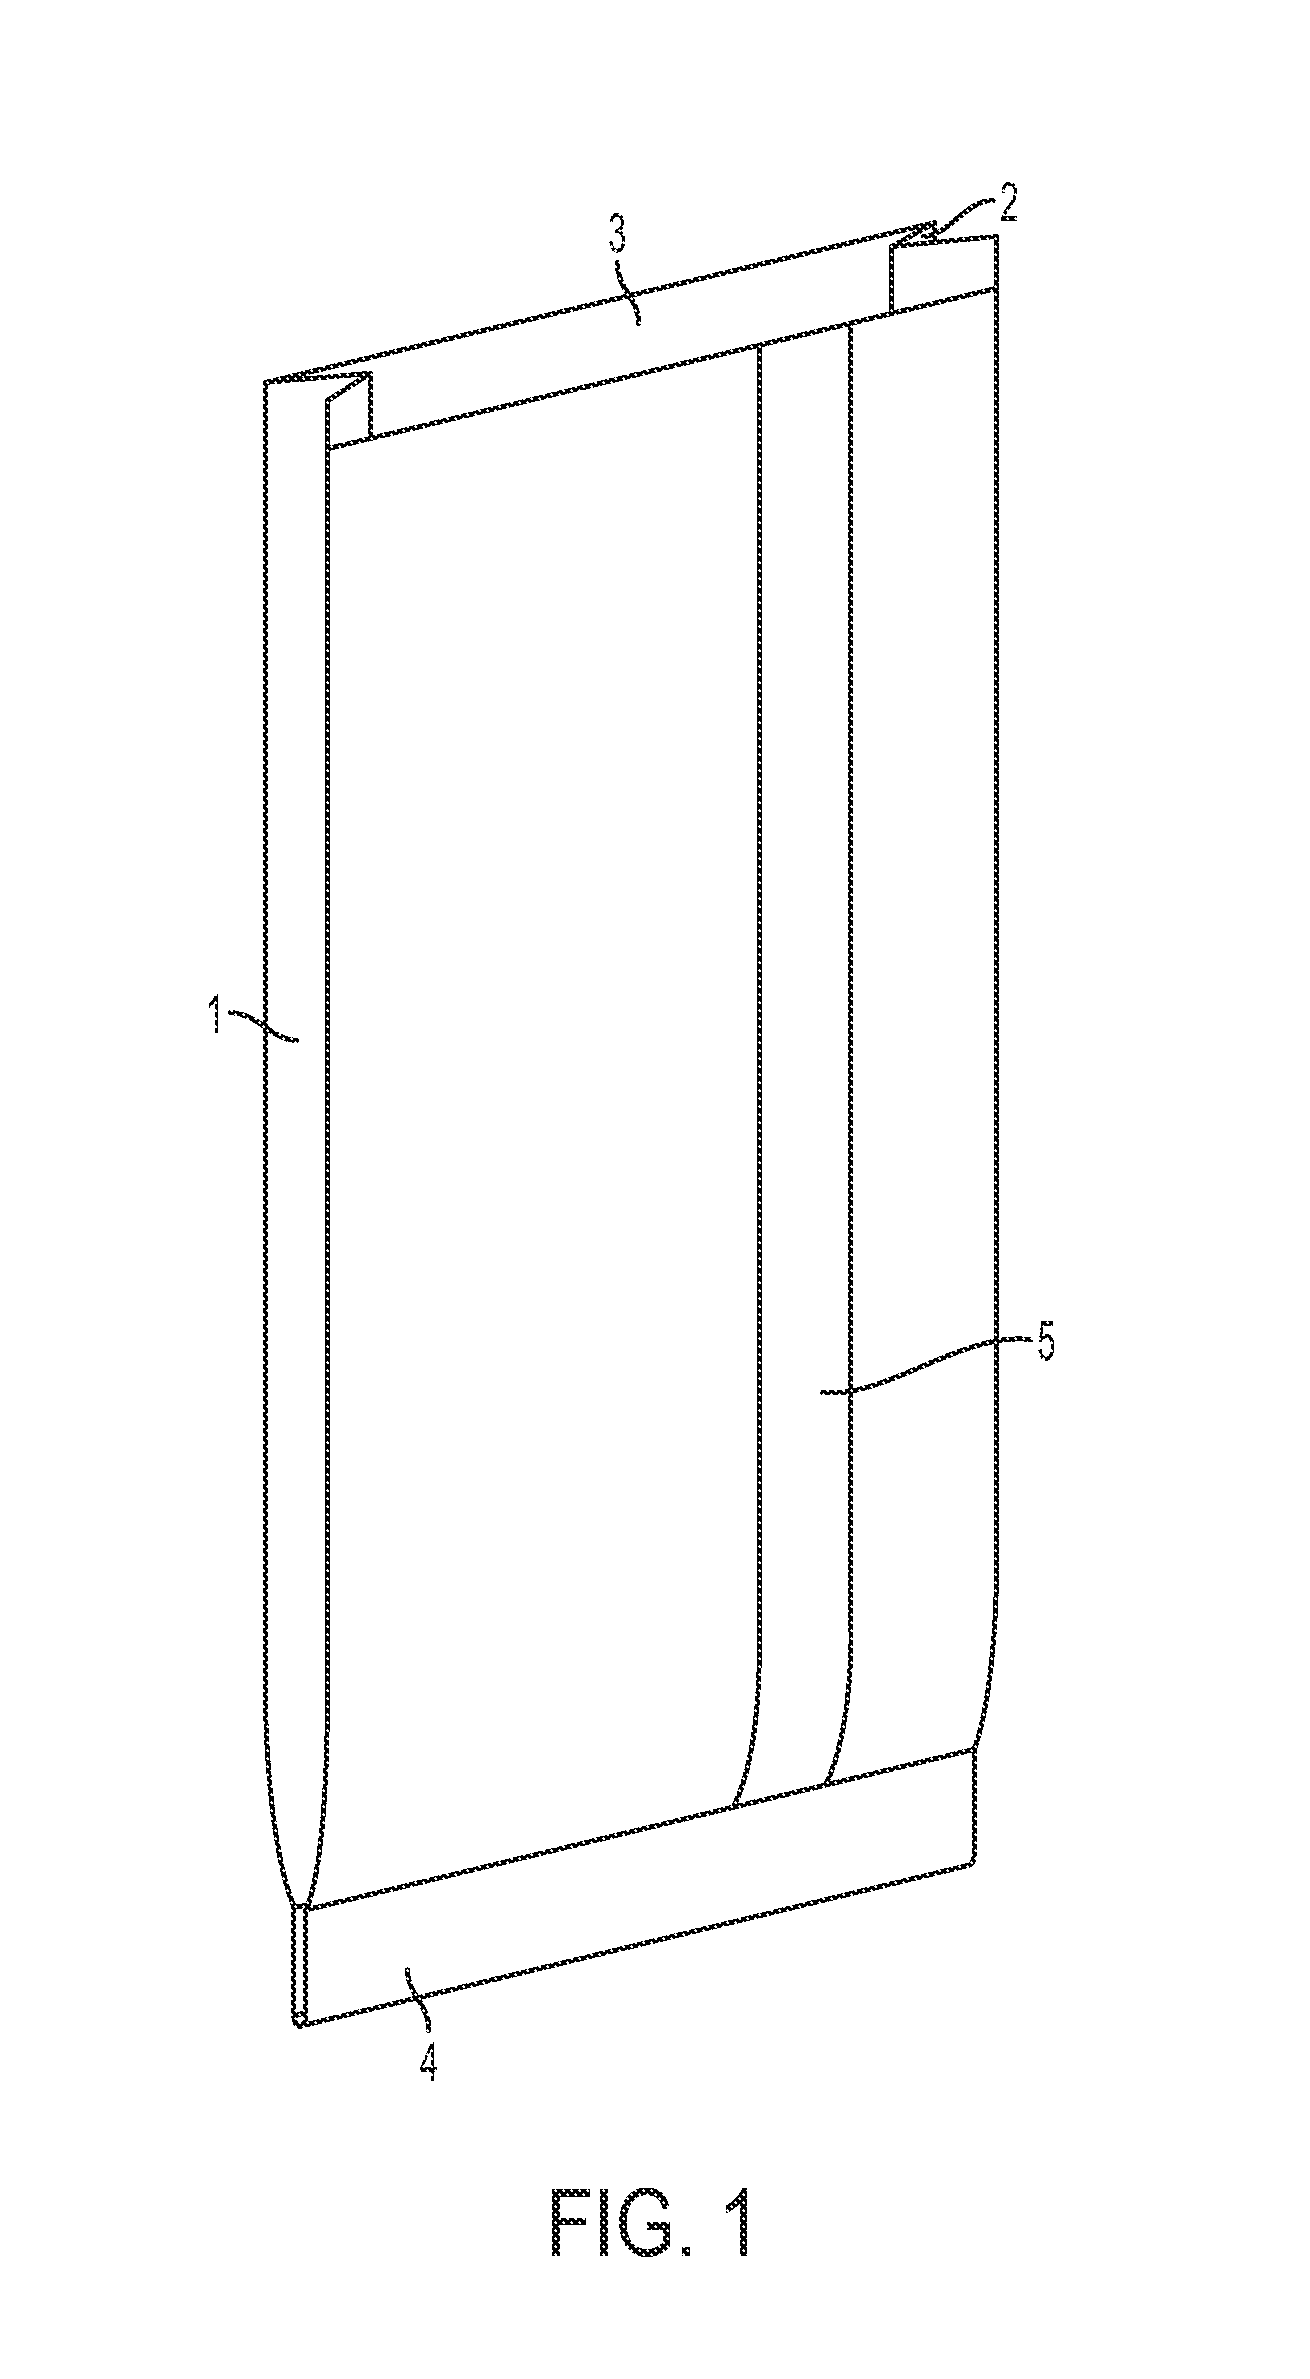 Laminate for packaging hygroscopic materials, pouches made therefrom, and method for manufacturing same